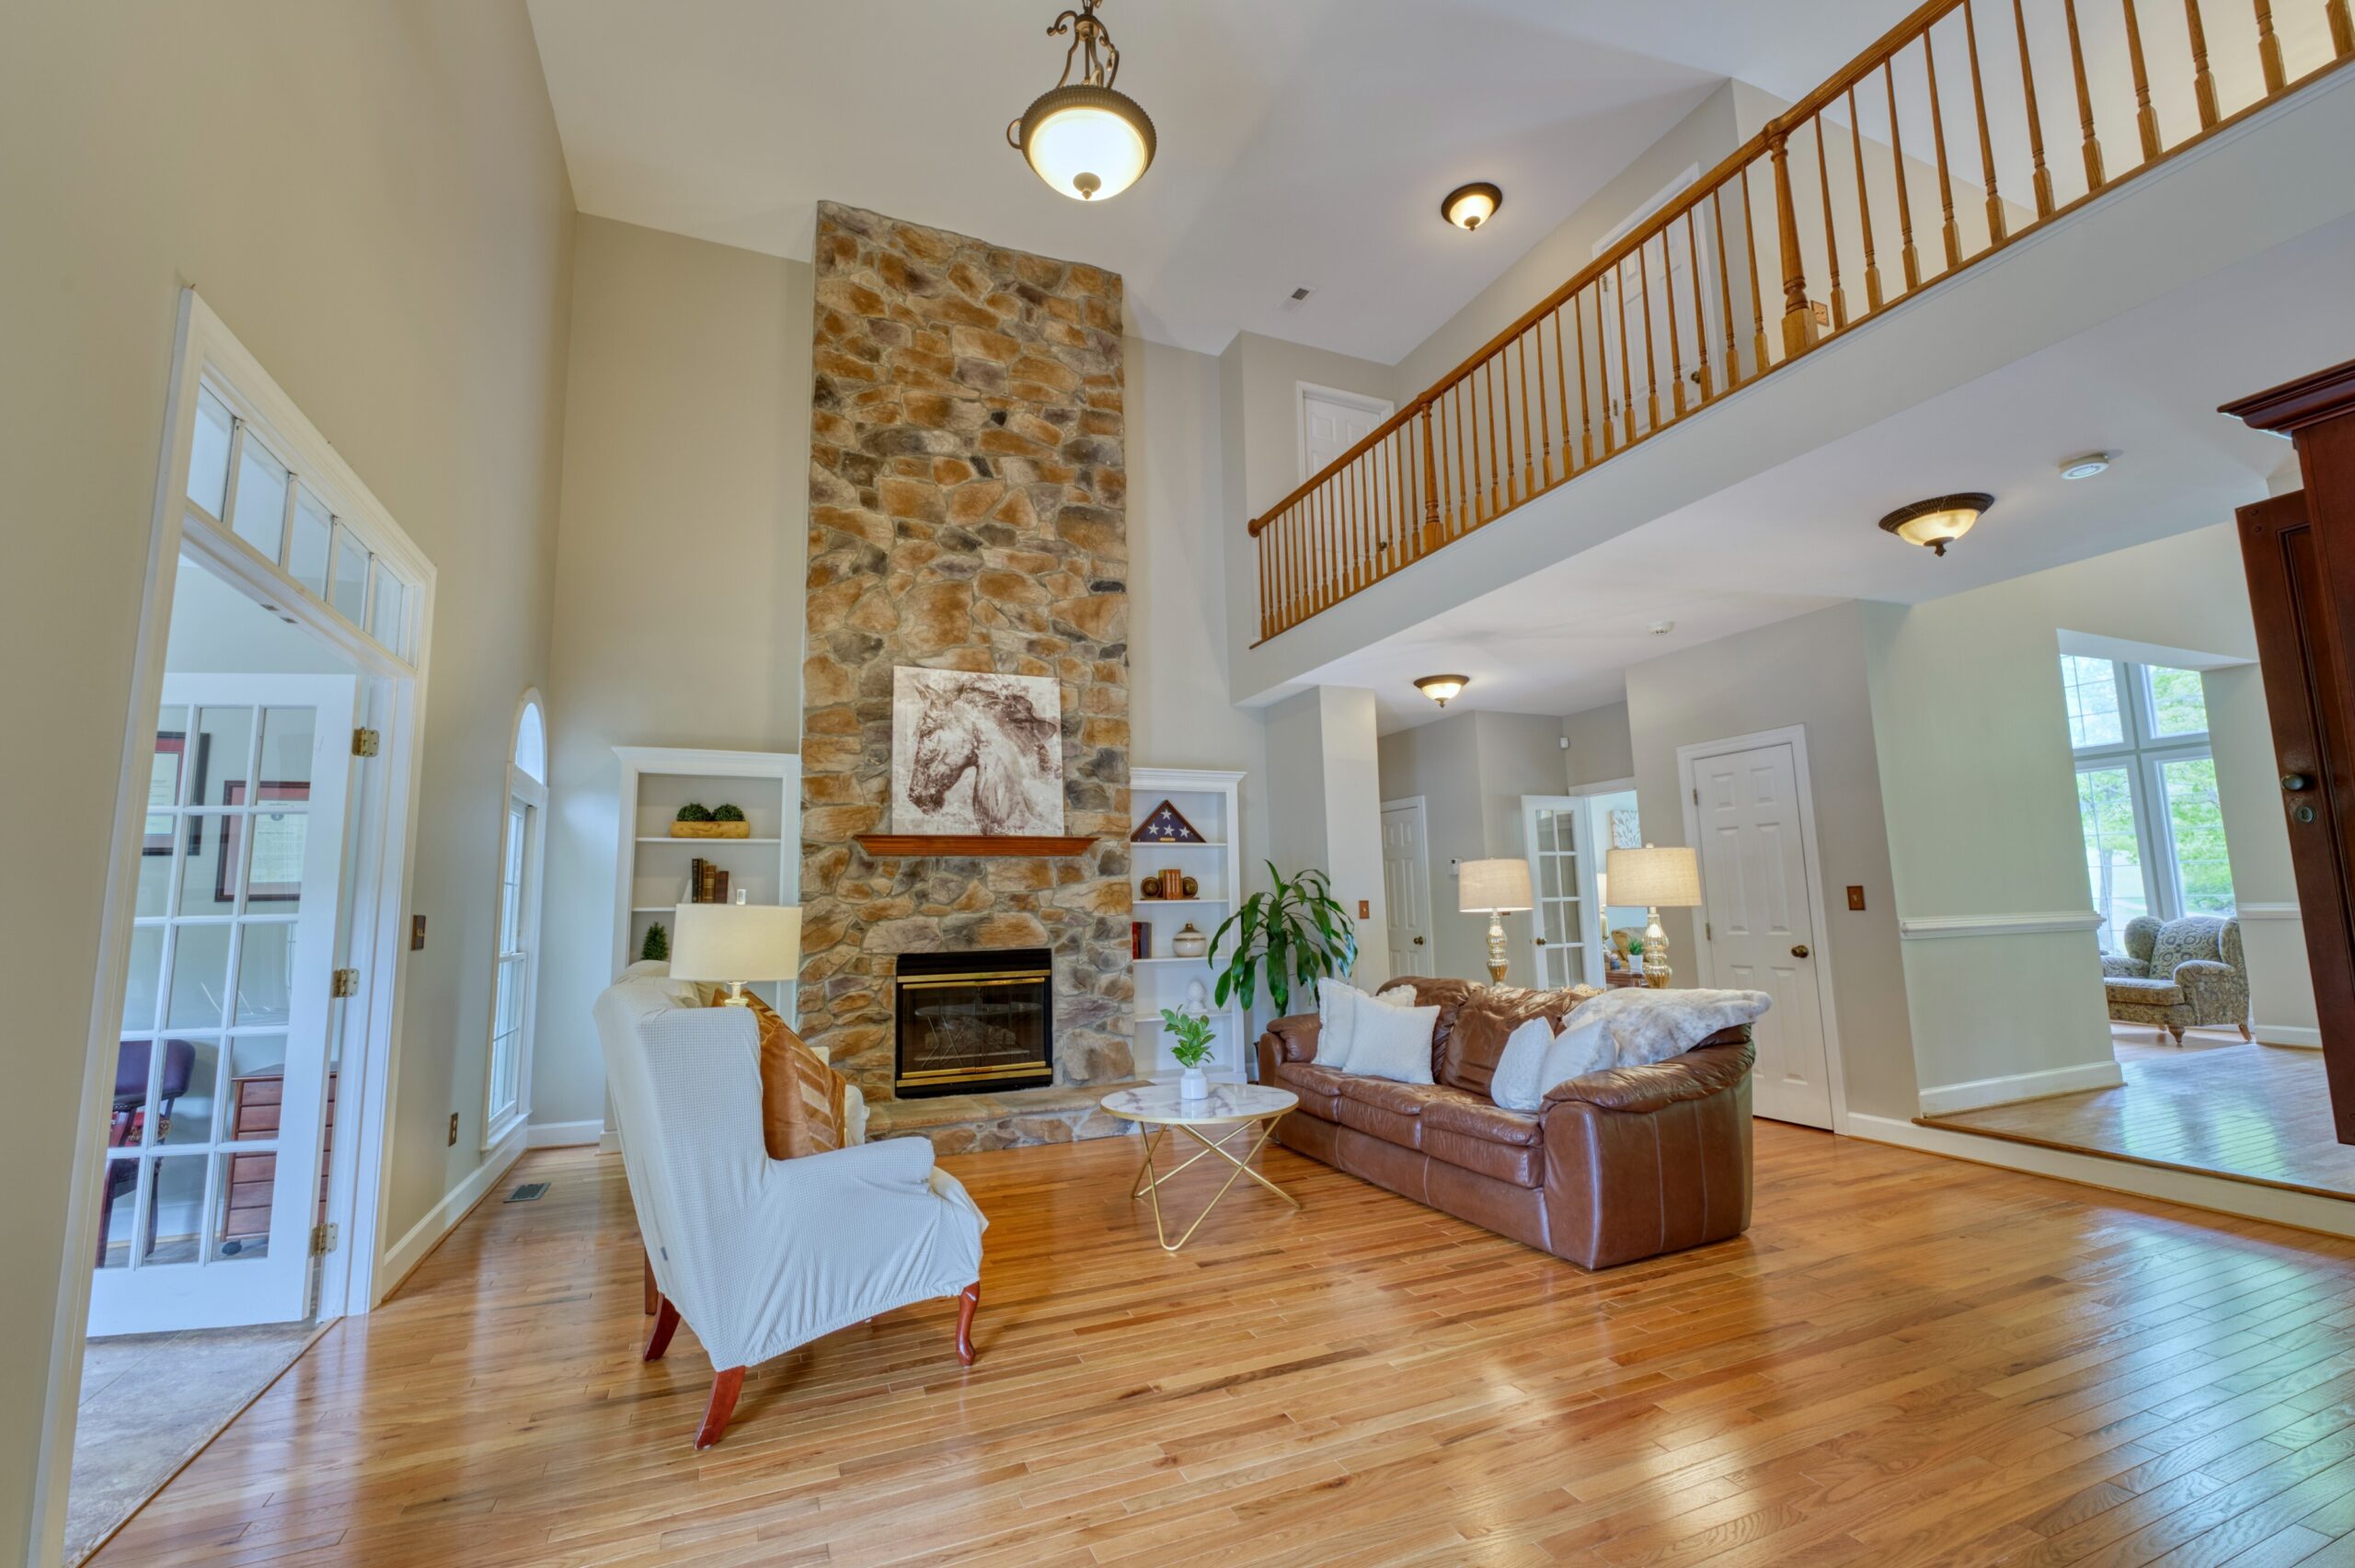 Professional interior photo of 13700 Holly Forest Dr - showing the main living room with hardwood floors, looking away from the windows toward the 2-story stone fireplace flanked by white built-in bookshelves
